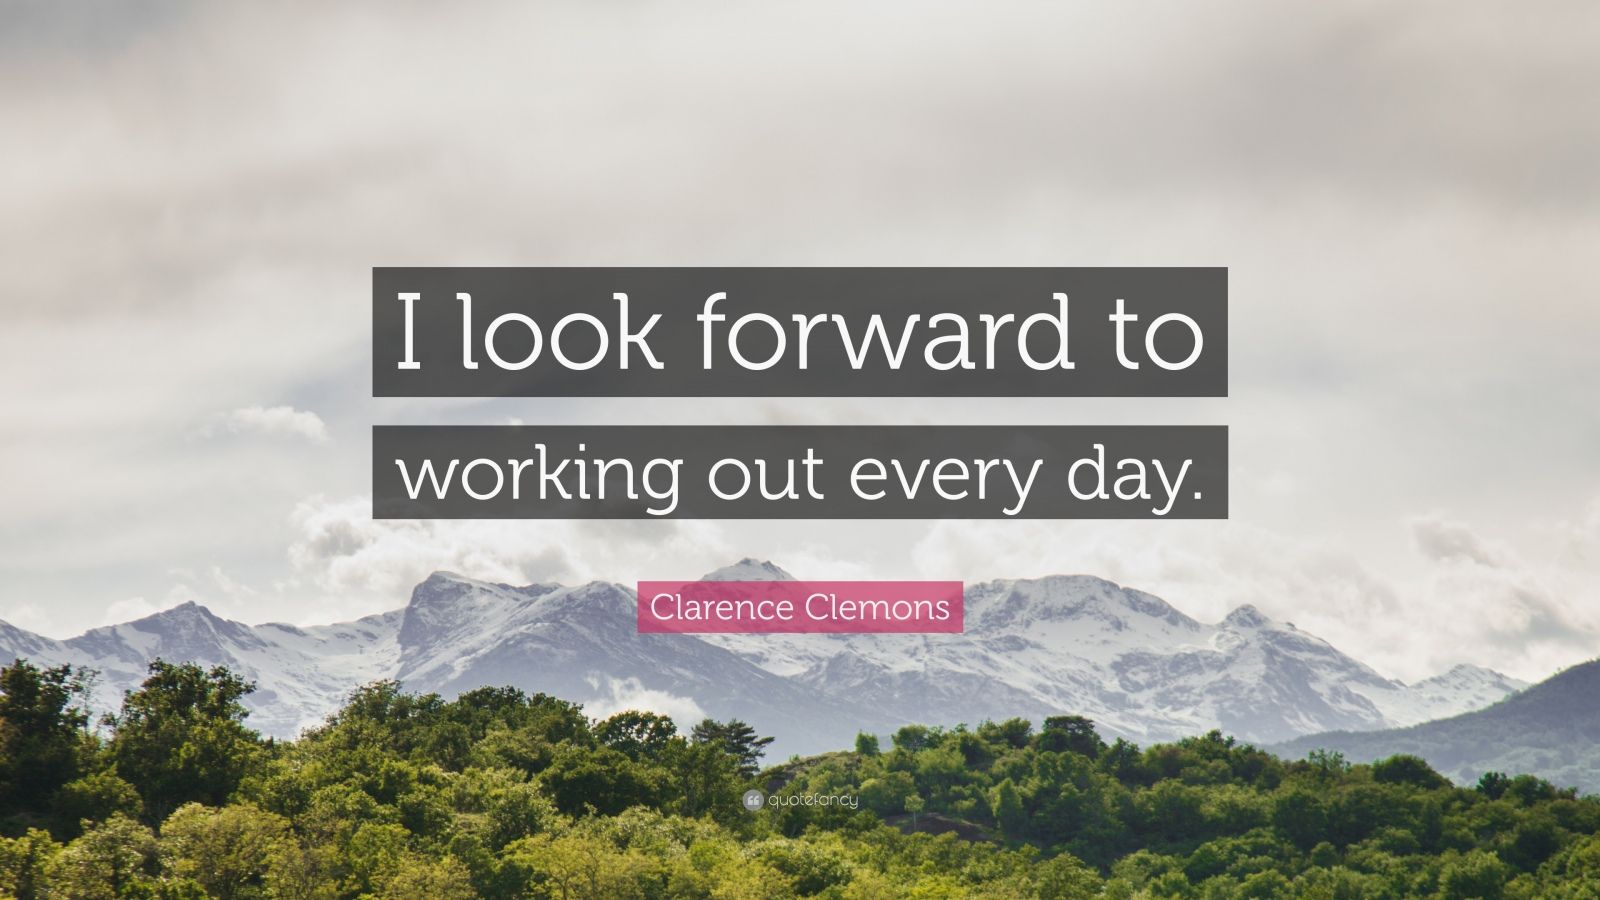 Clarence Clemons Quote: “I look forward to working out every day.”